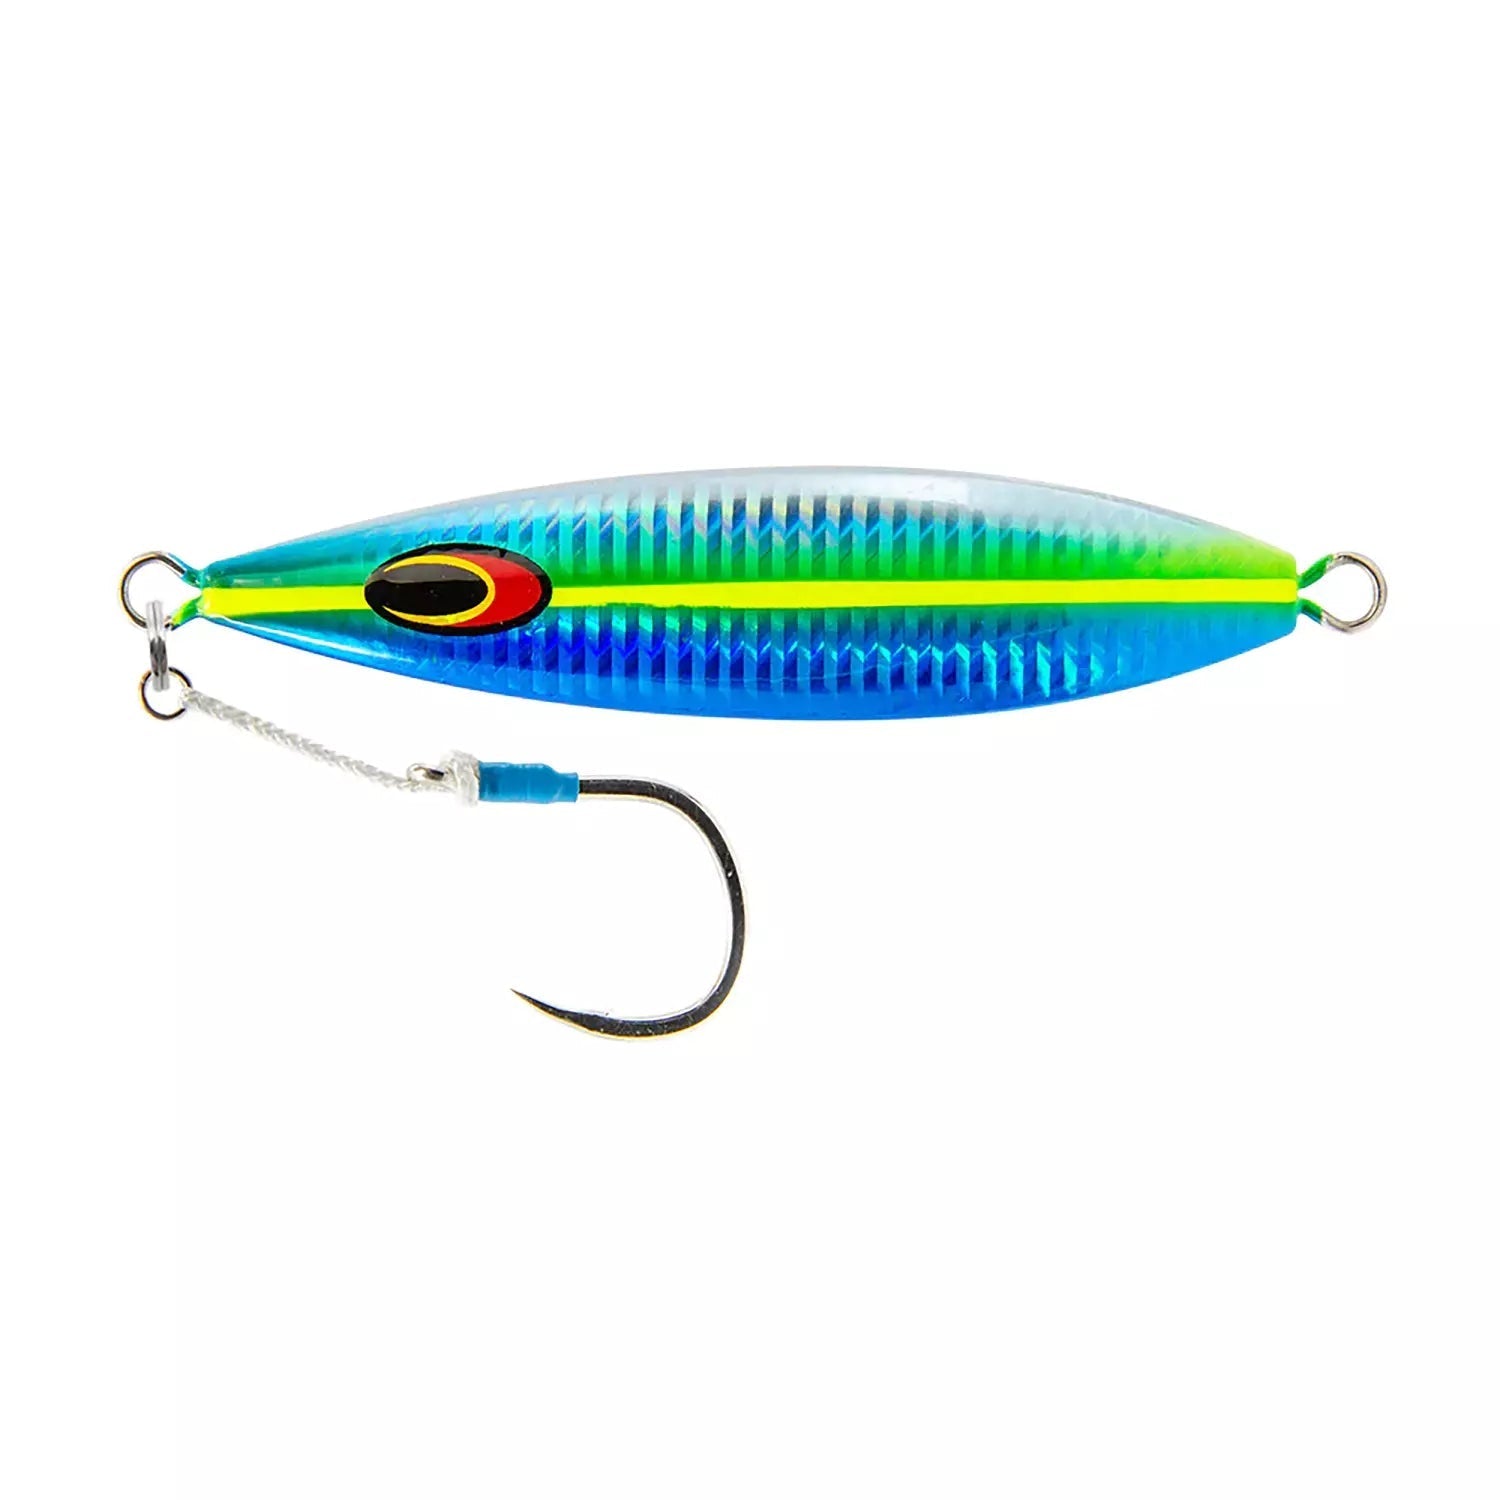 Nomad Gypsea Jig-Lure - Jig-Nomad-200g-Fusilier-Fishing Station